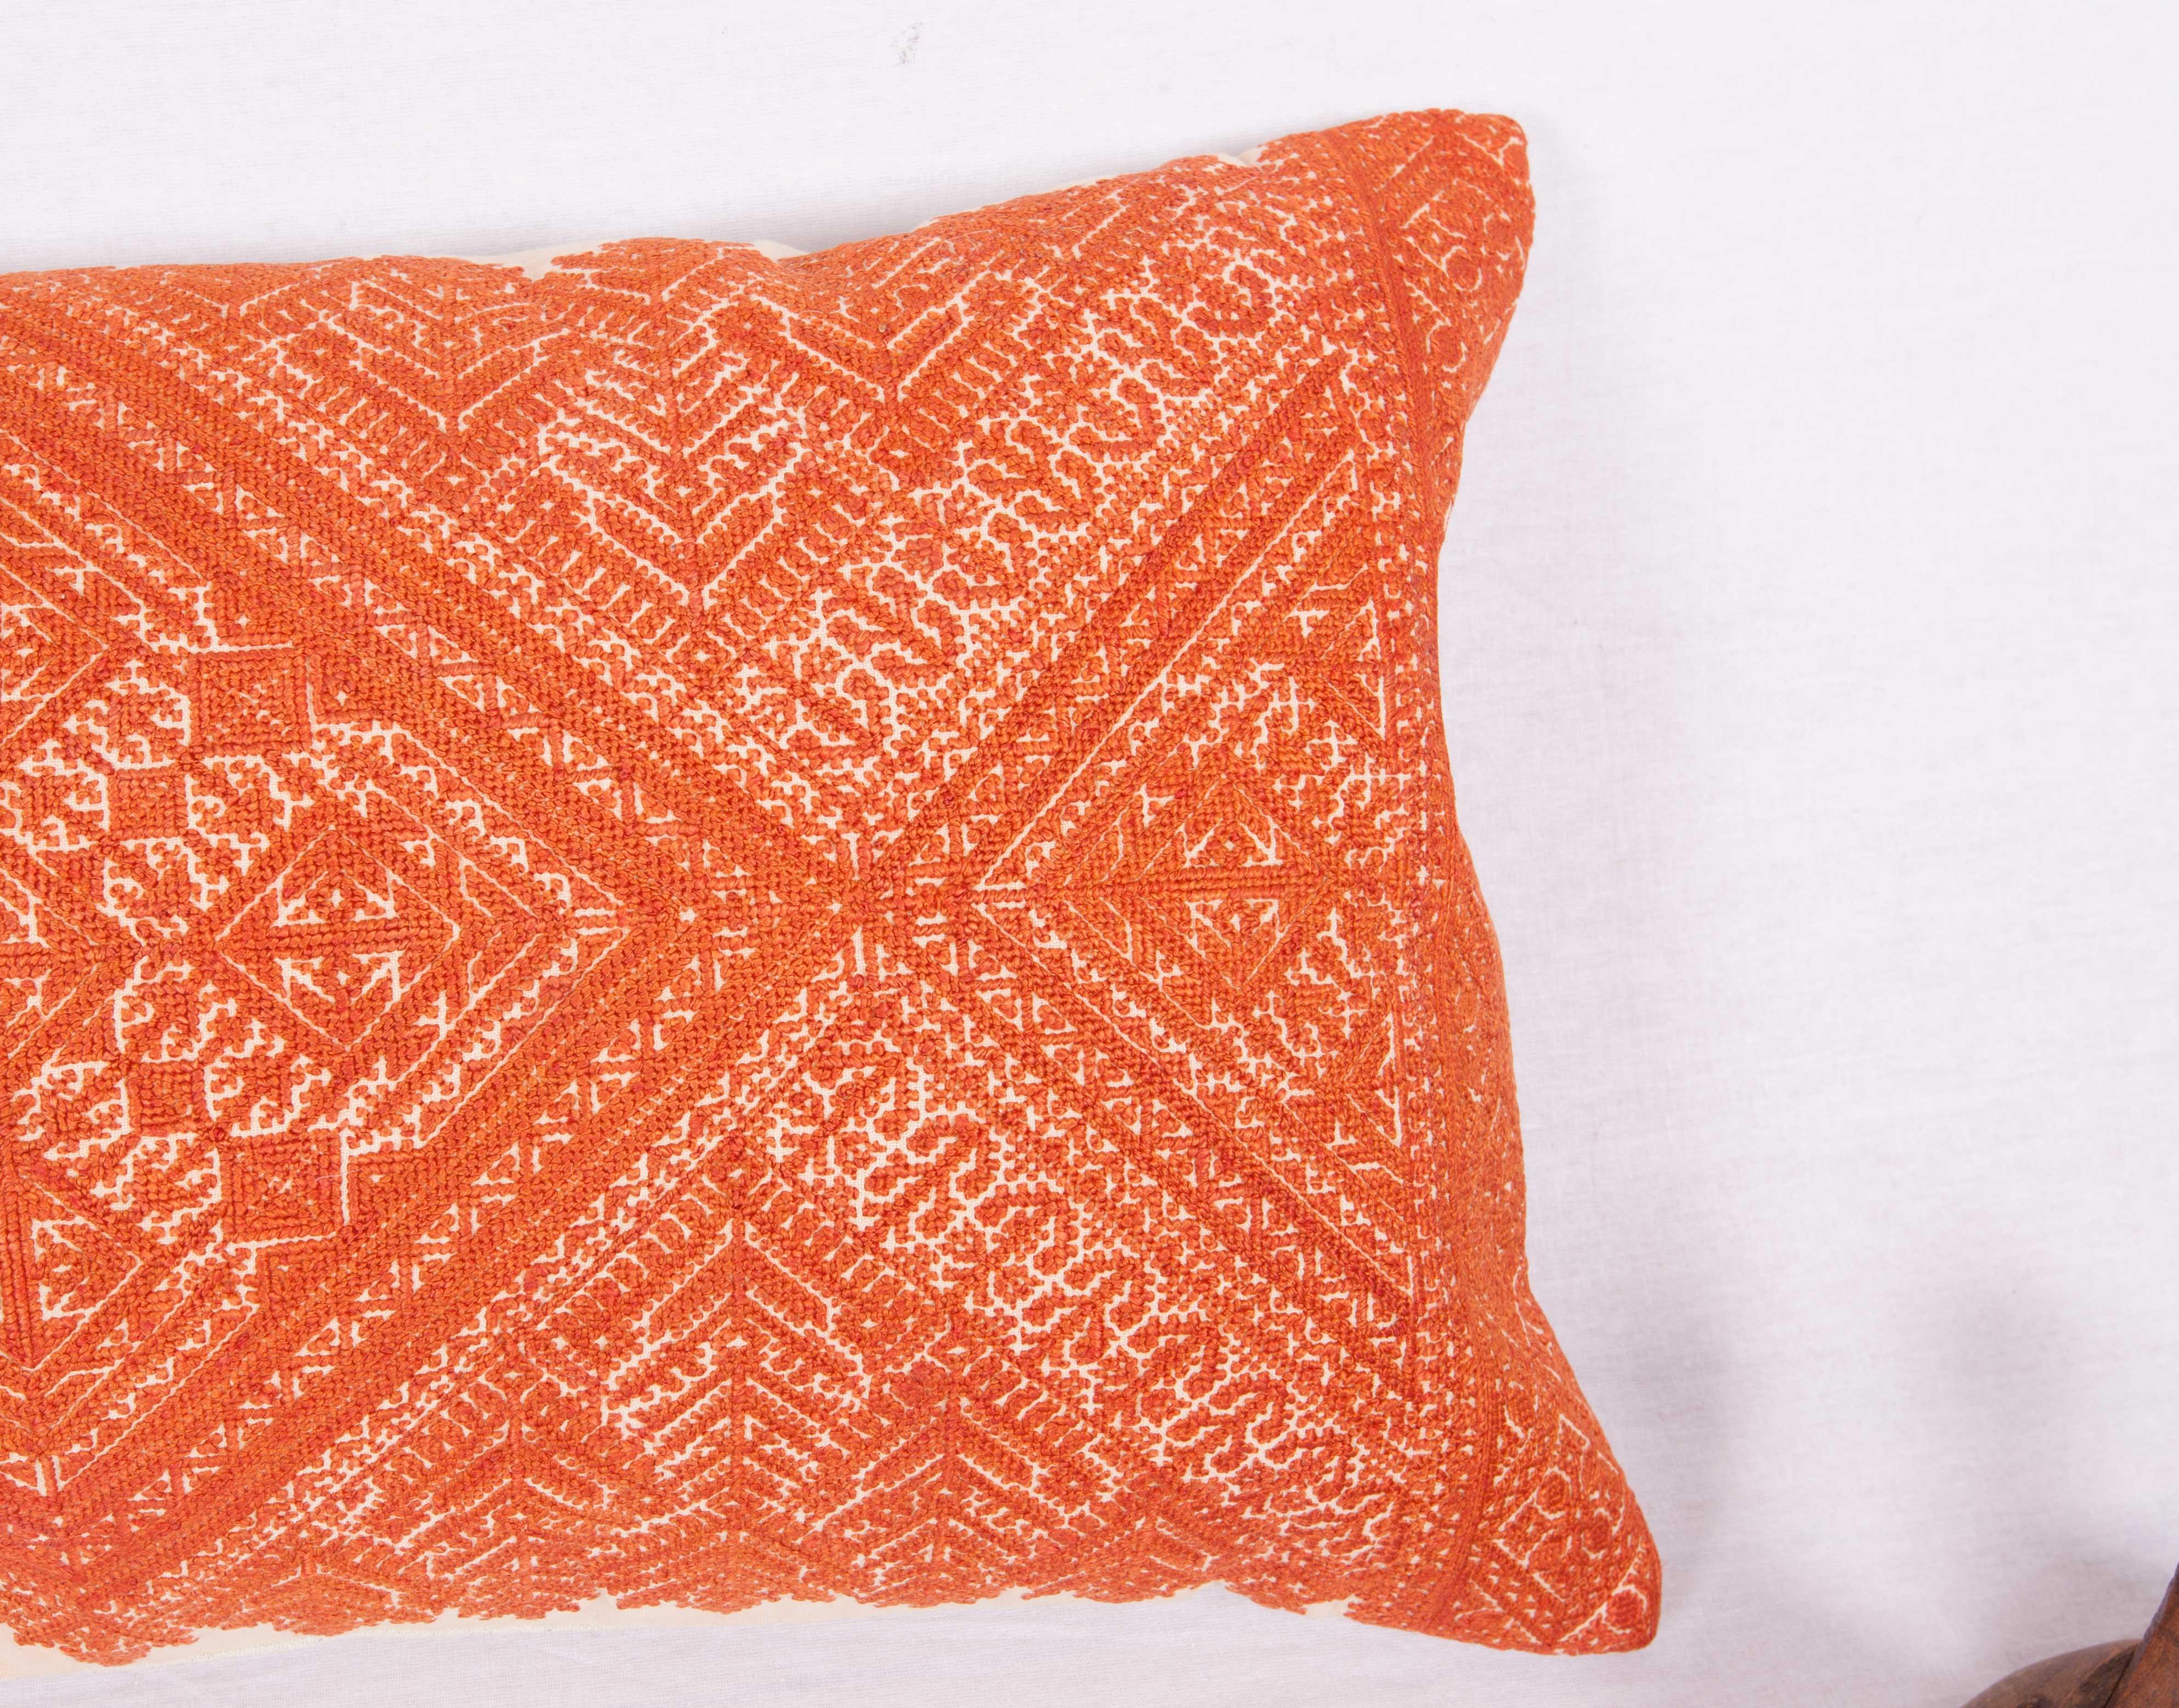 Embroidered Pillow Case Made from an Early 20th Century Fez Embroidery from Morocco